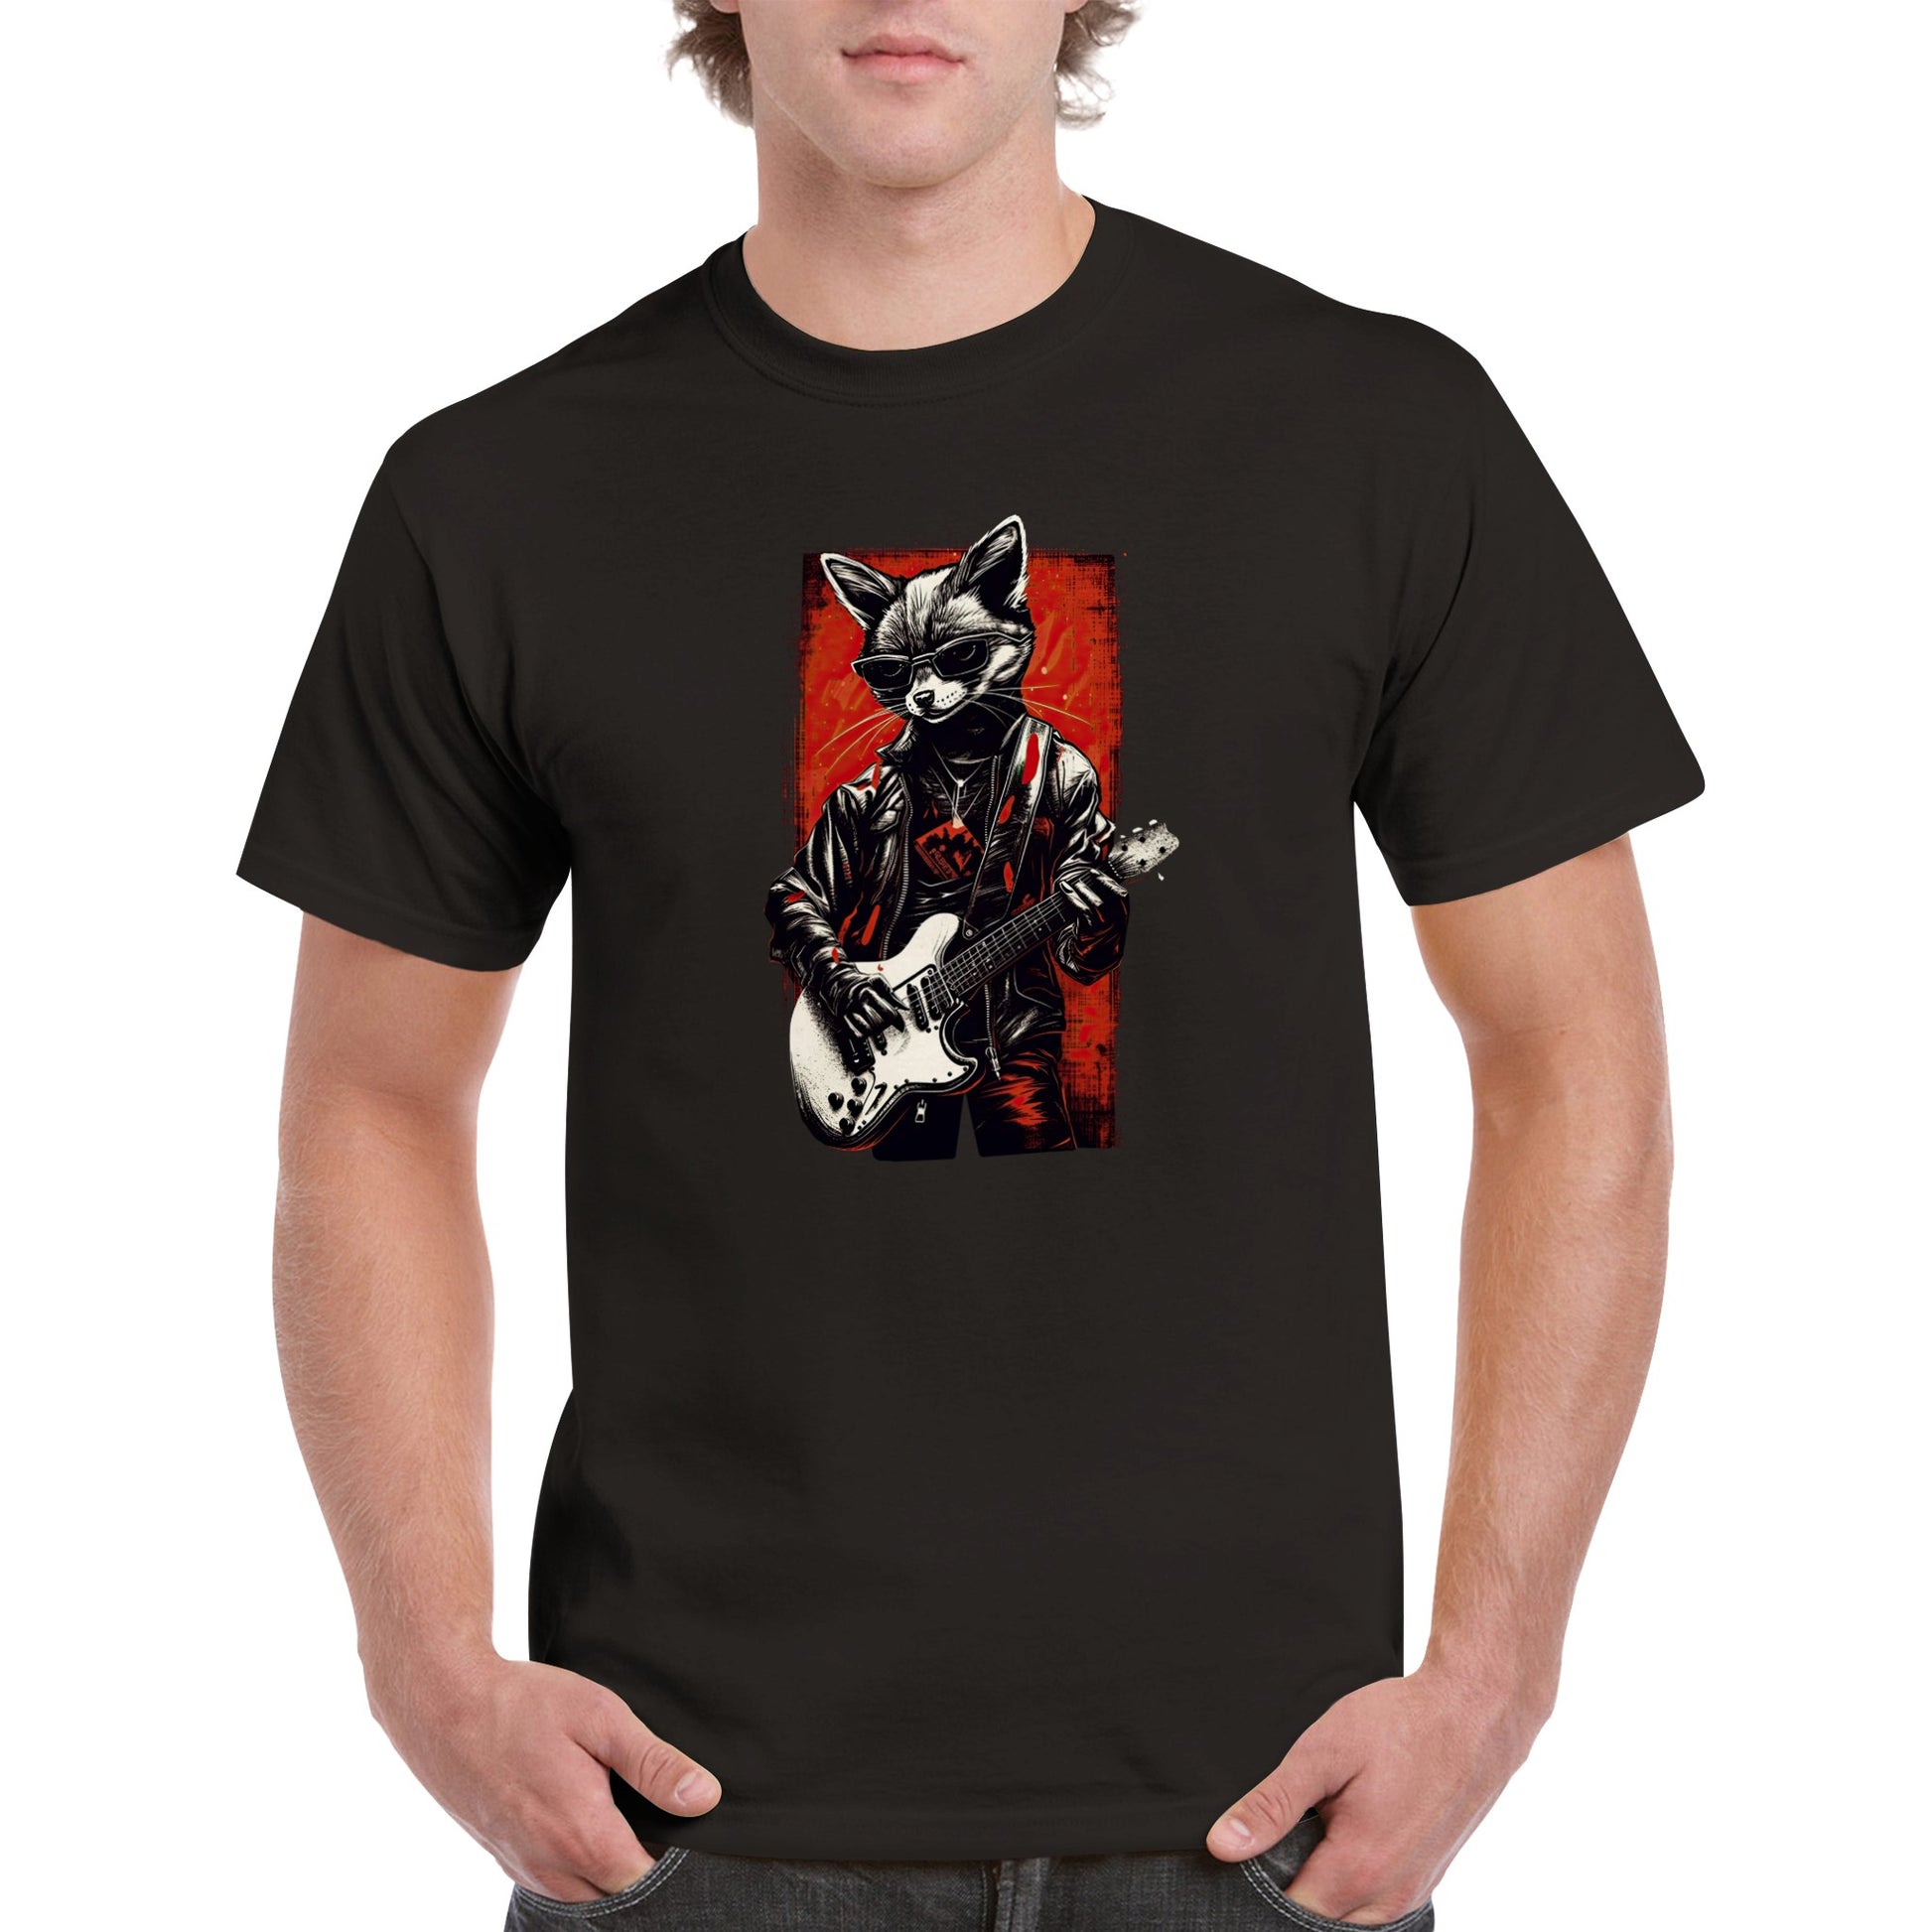 guy wearing a black t-shirt with a cool fox playing bass guitar print